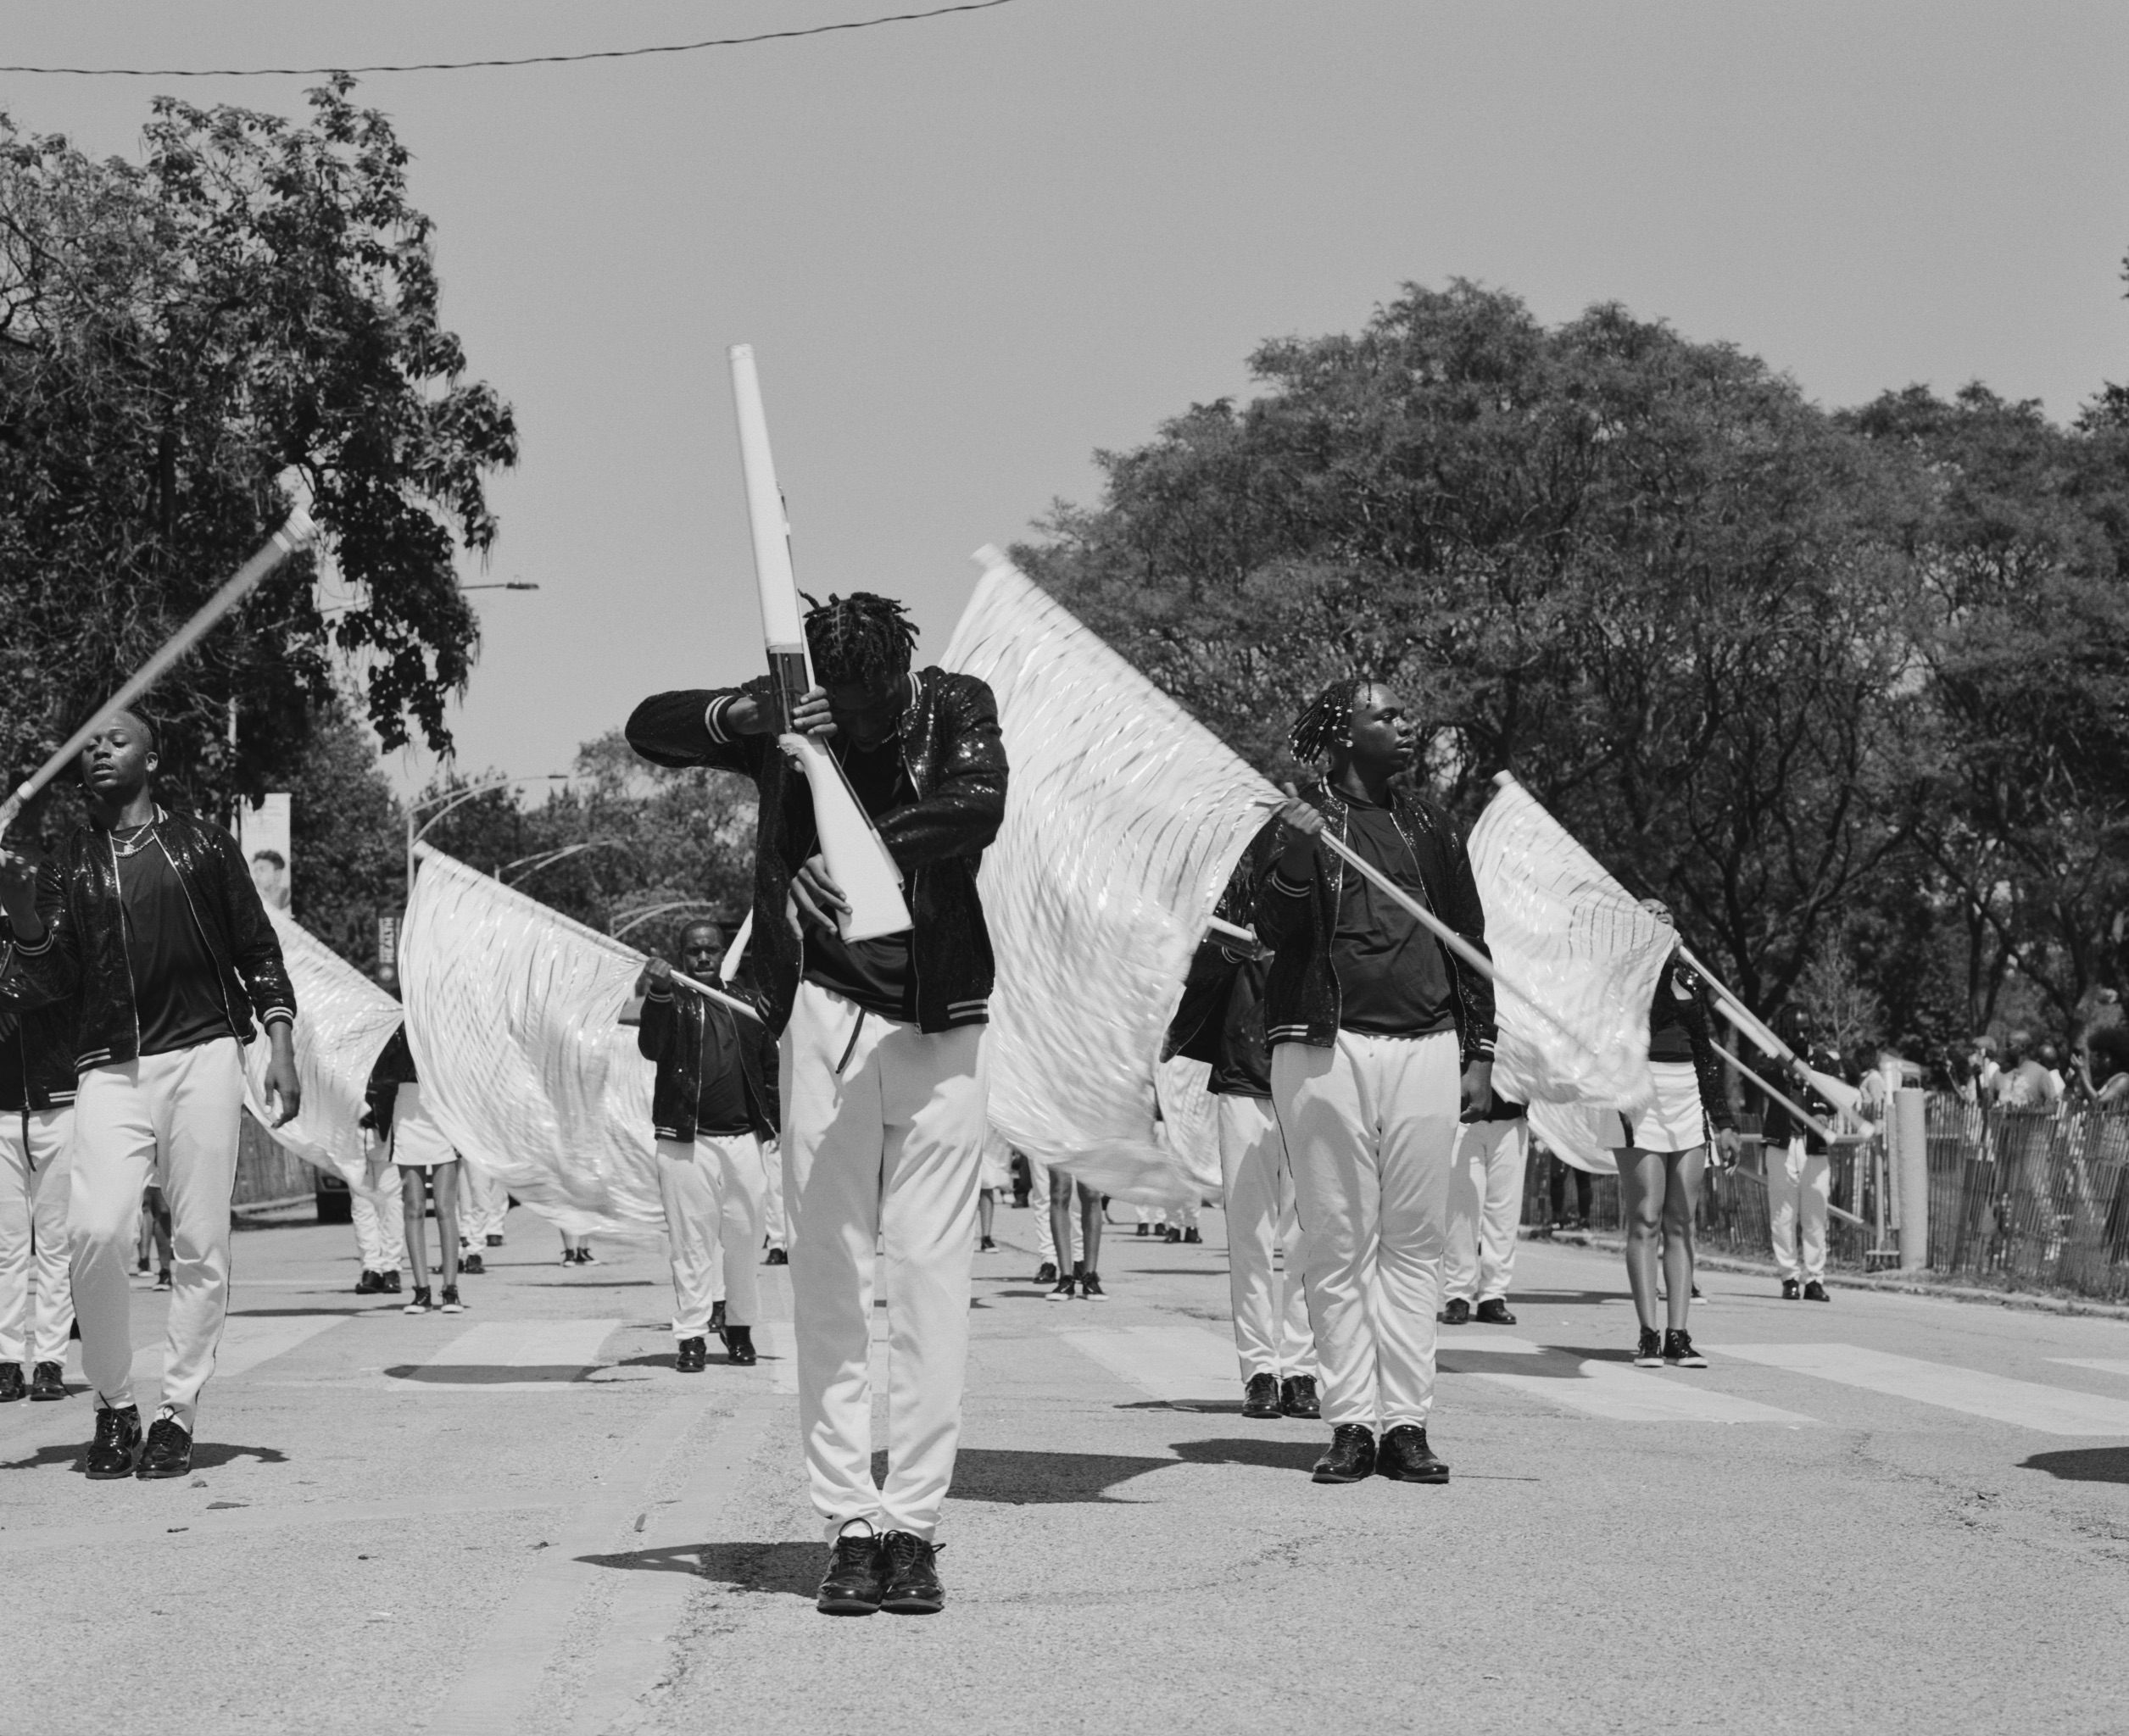 Photograph of South Shore Drill Team during a performance. Central figure is twirling a rifle while the figures in the back are performing with large white flags. 